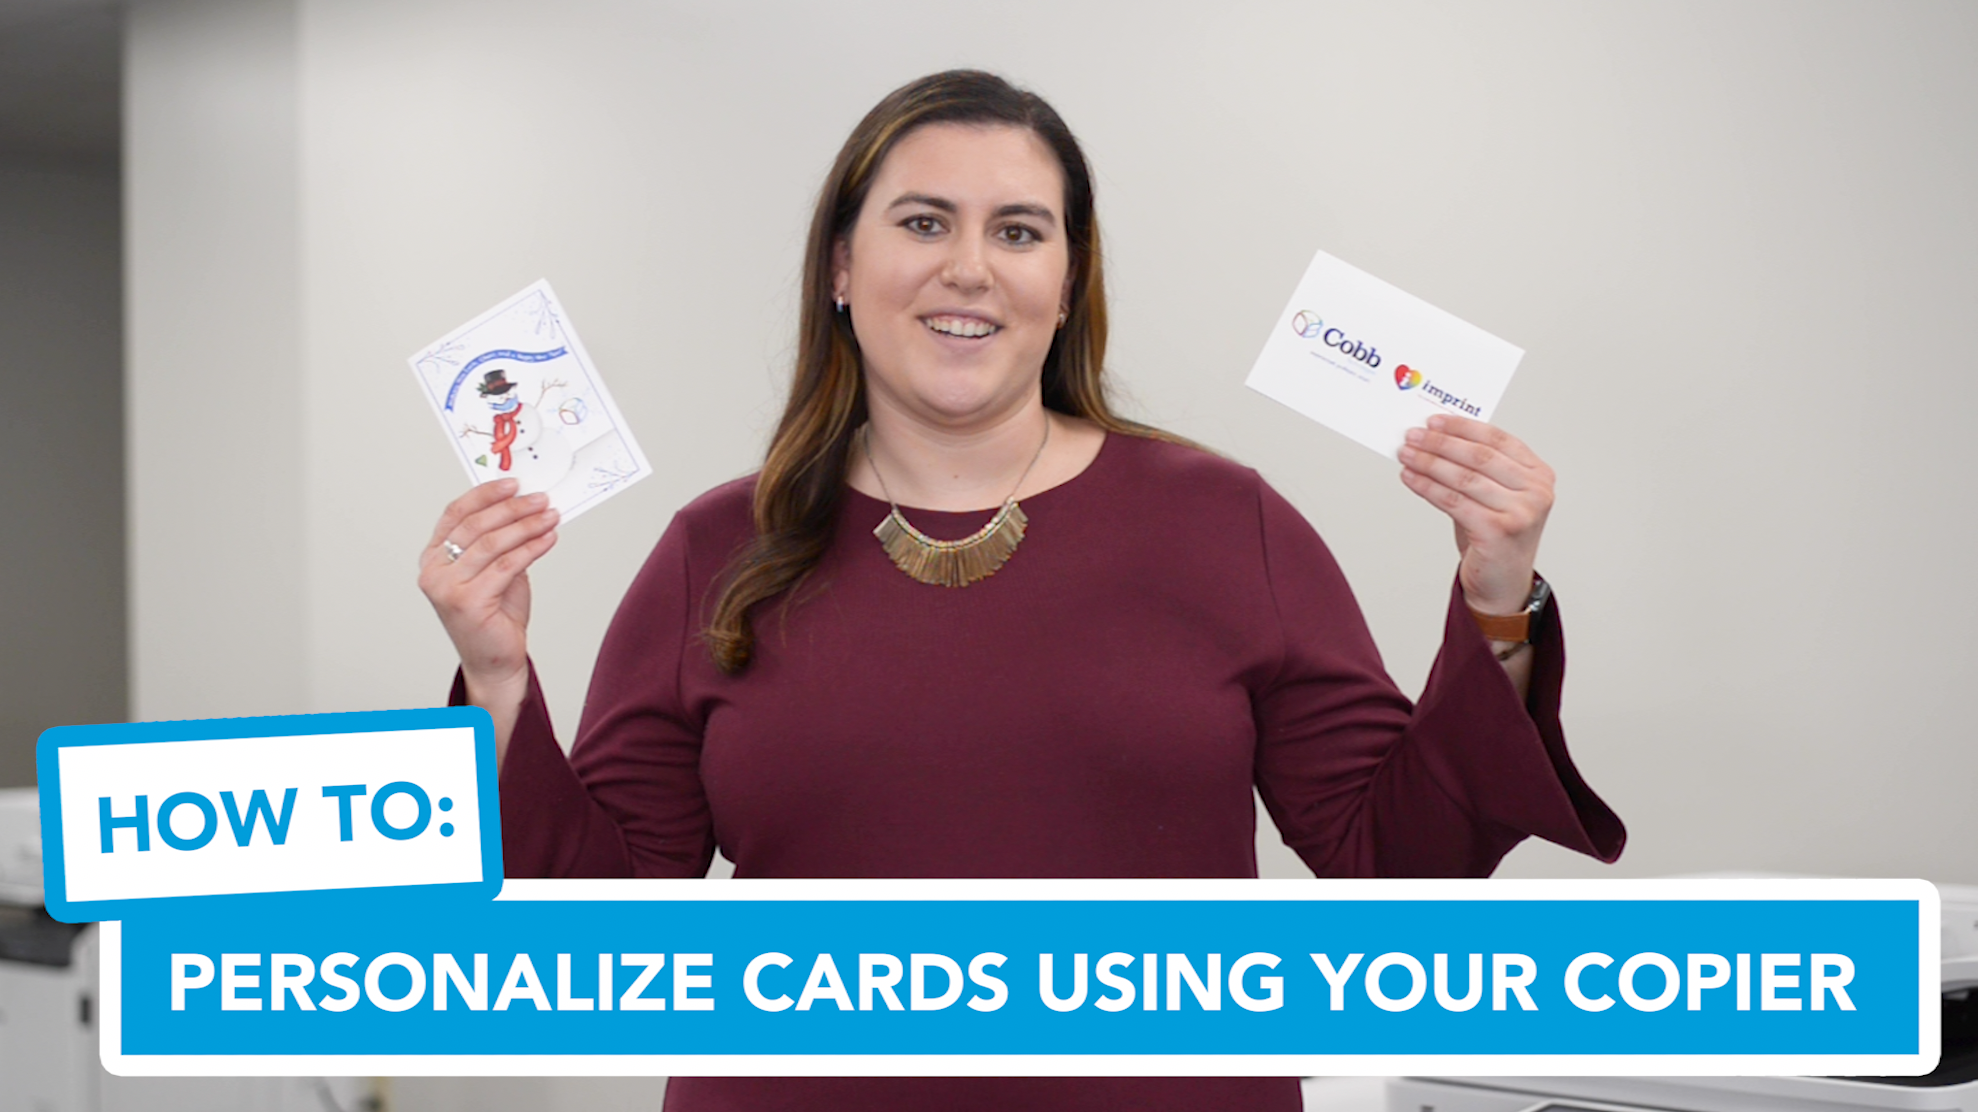 How to Personalize Cards Using Your Copier